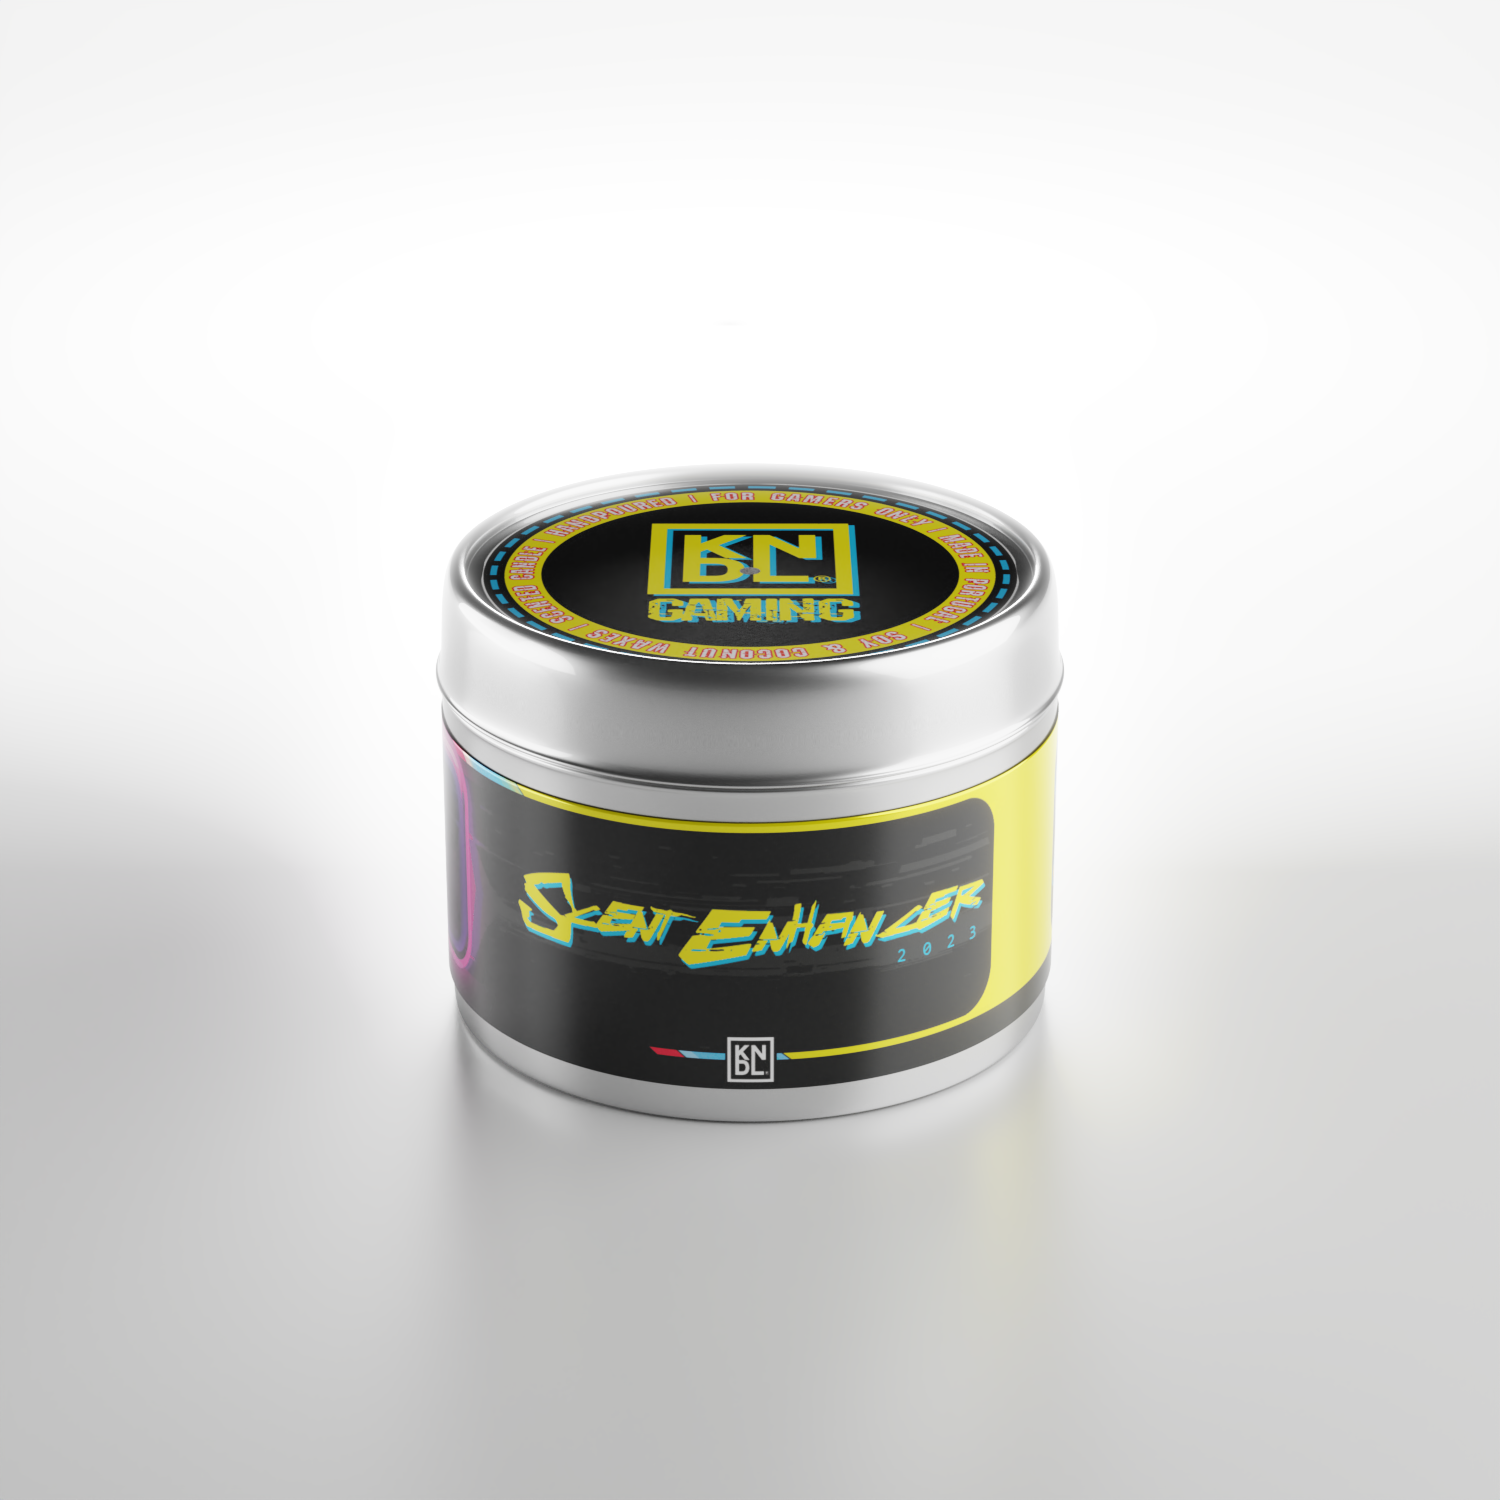 TIN NR 19 | SCENT ENHANCER | CYBERPUNK INSPIRED SCENTED CANDLE